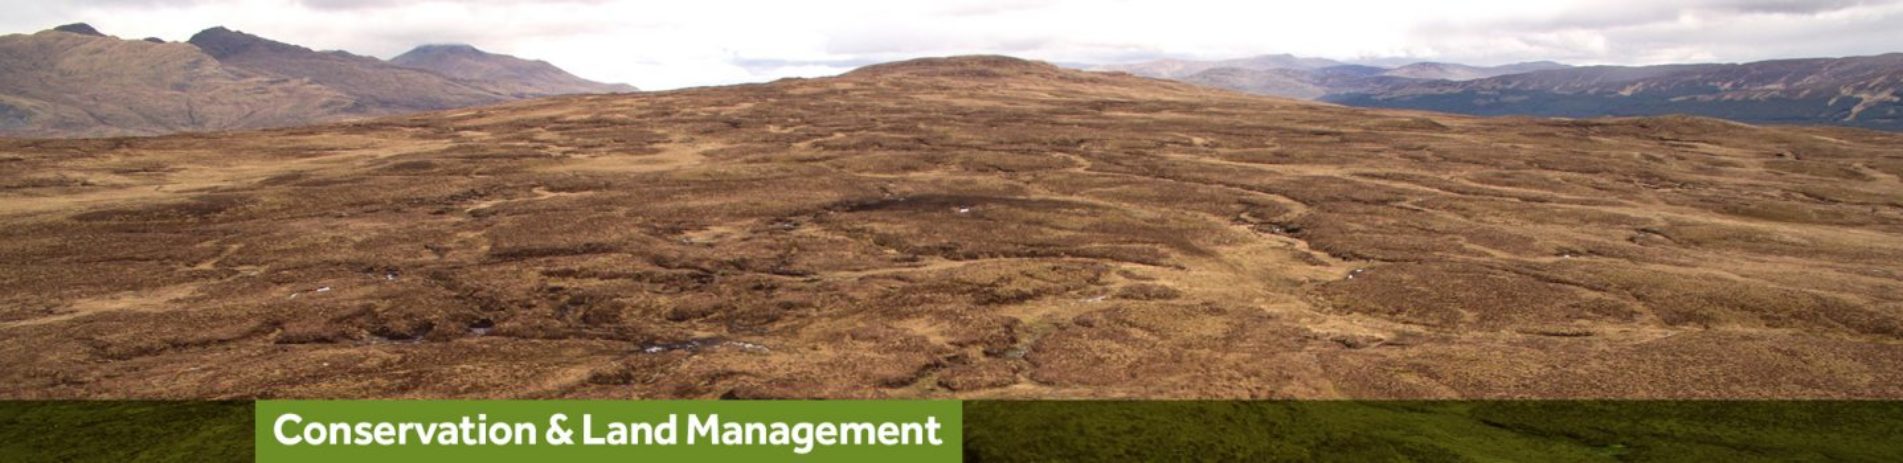 peatland-header-text-reads-conservation-and-land-management